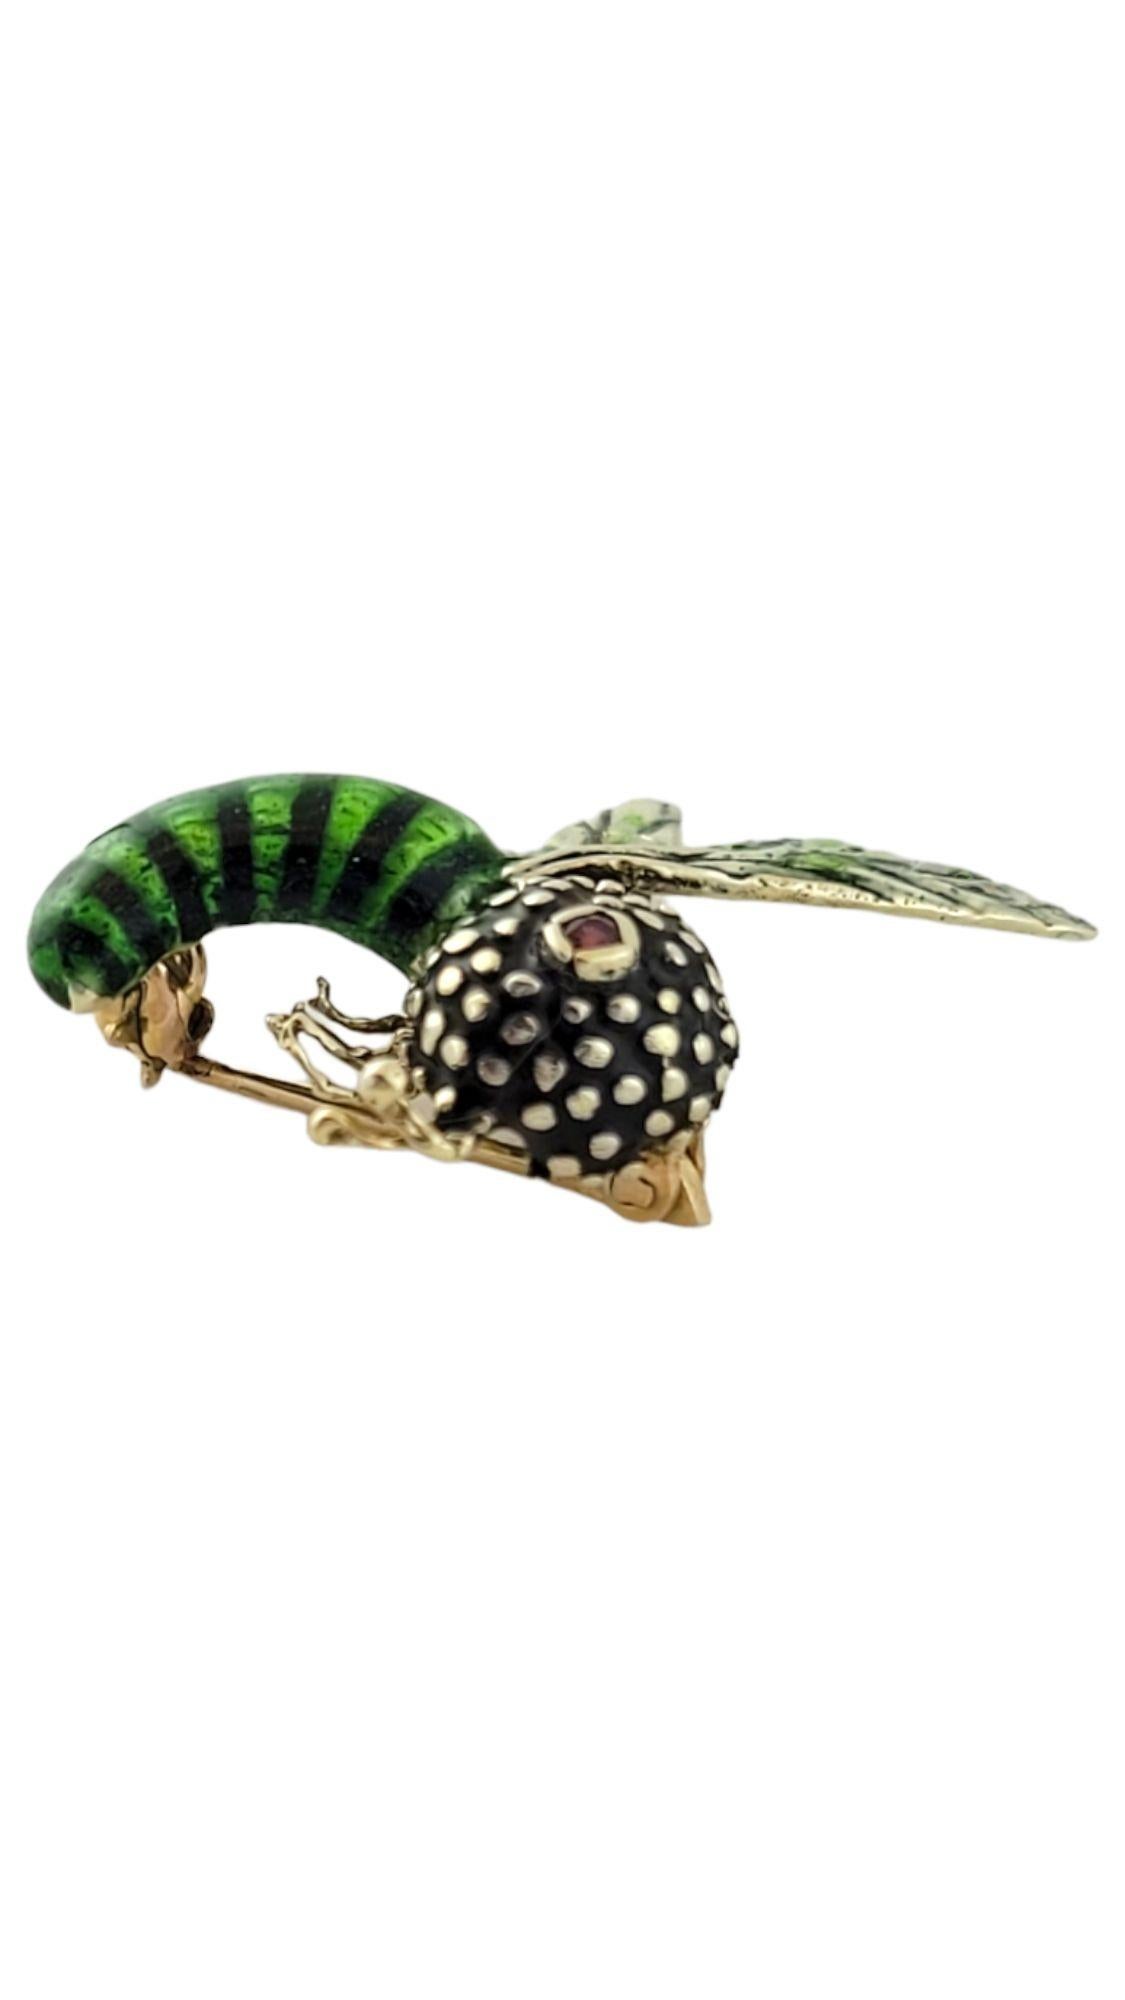 14K Yellow Gold Green and Black Enamel Wasp Bee Pin #14470 In Good Condition For Sale In Washington Depot, CT